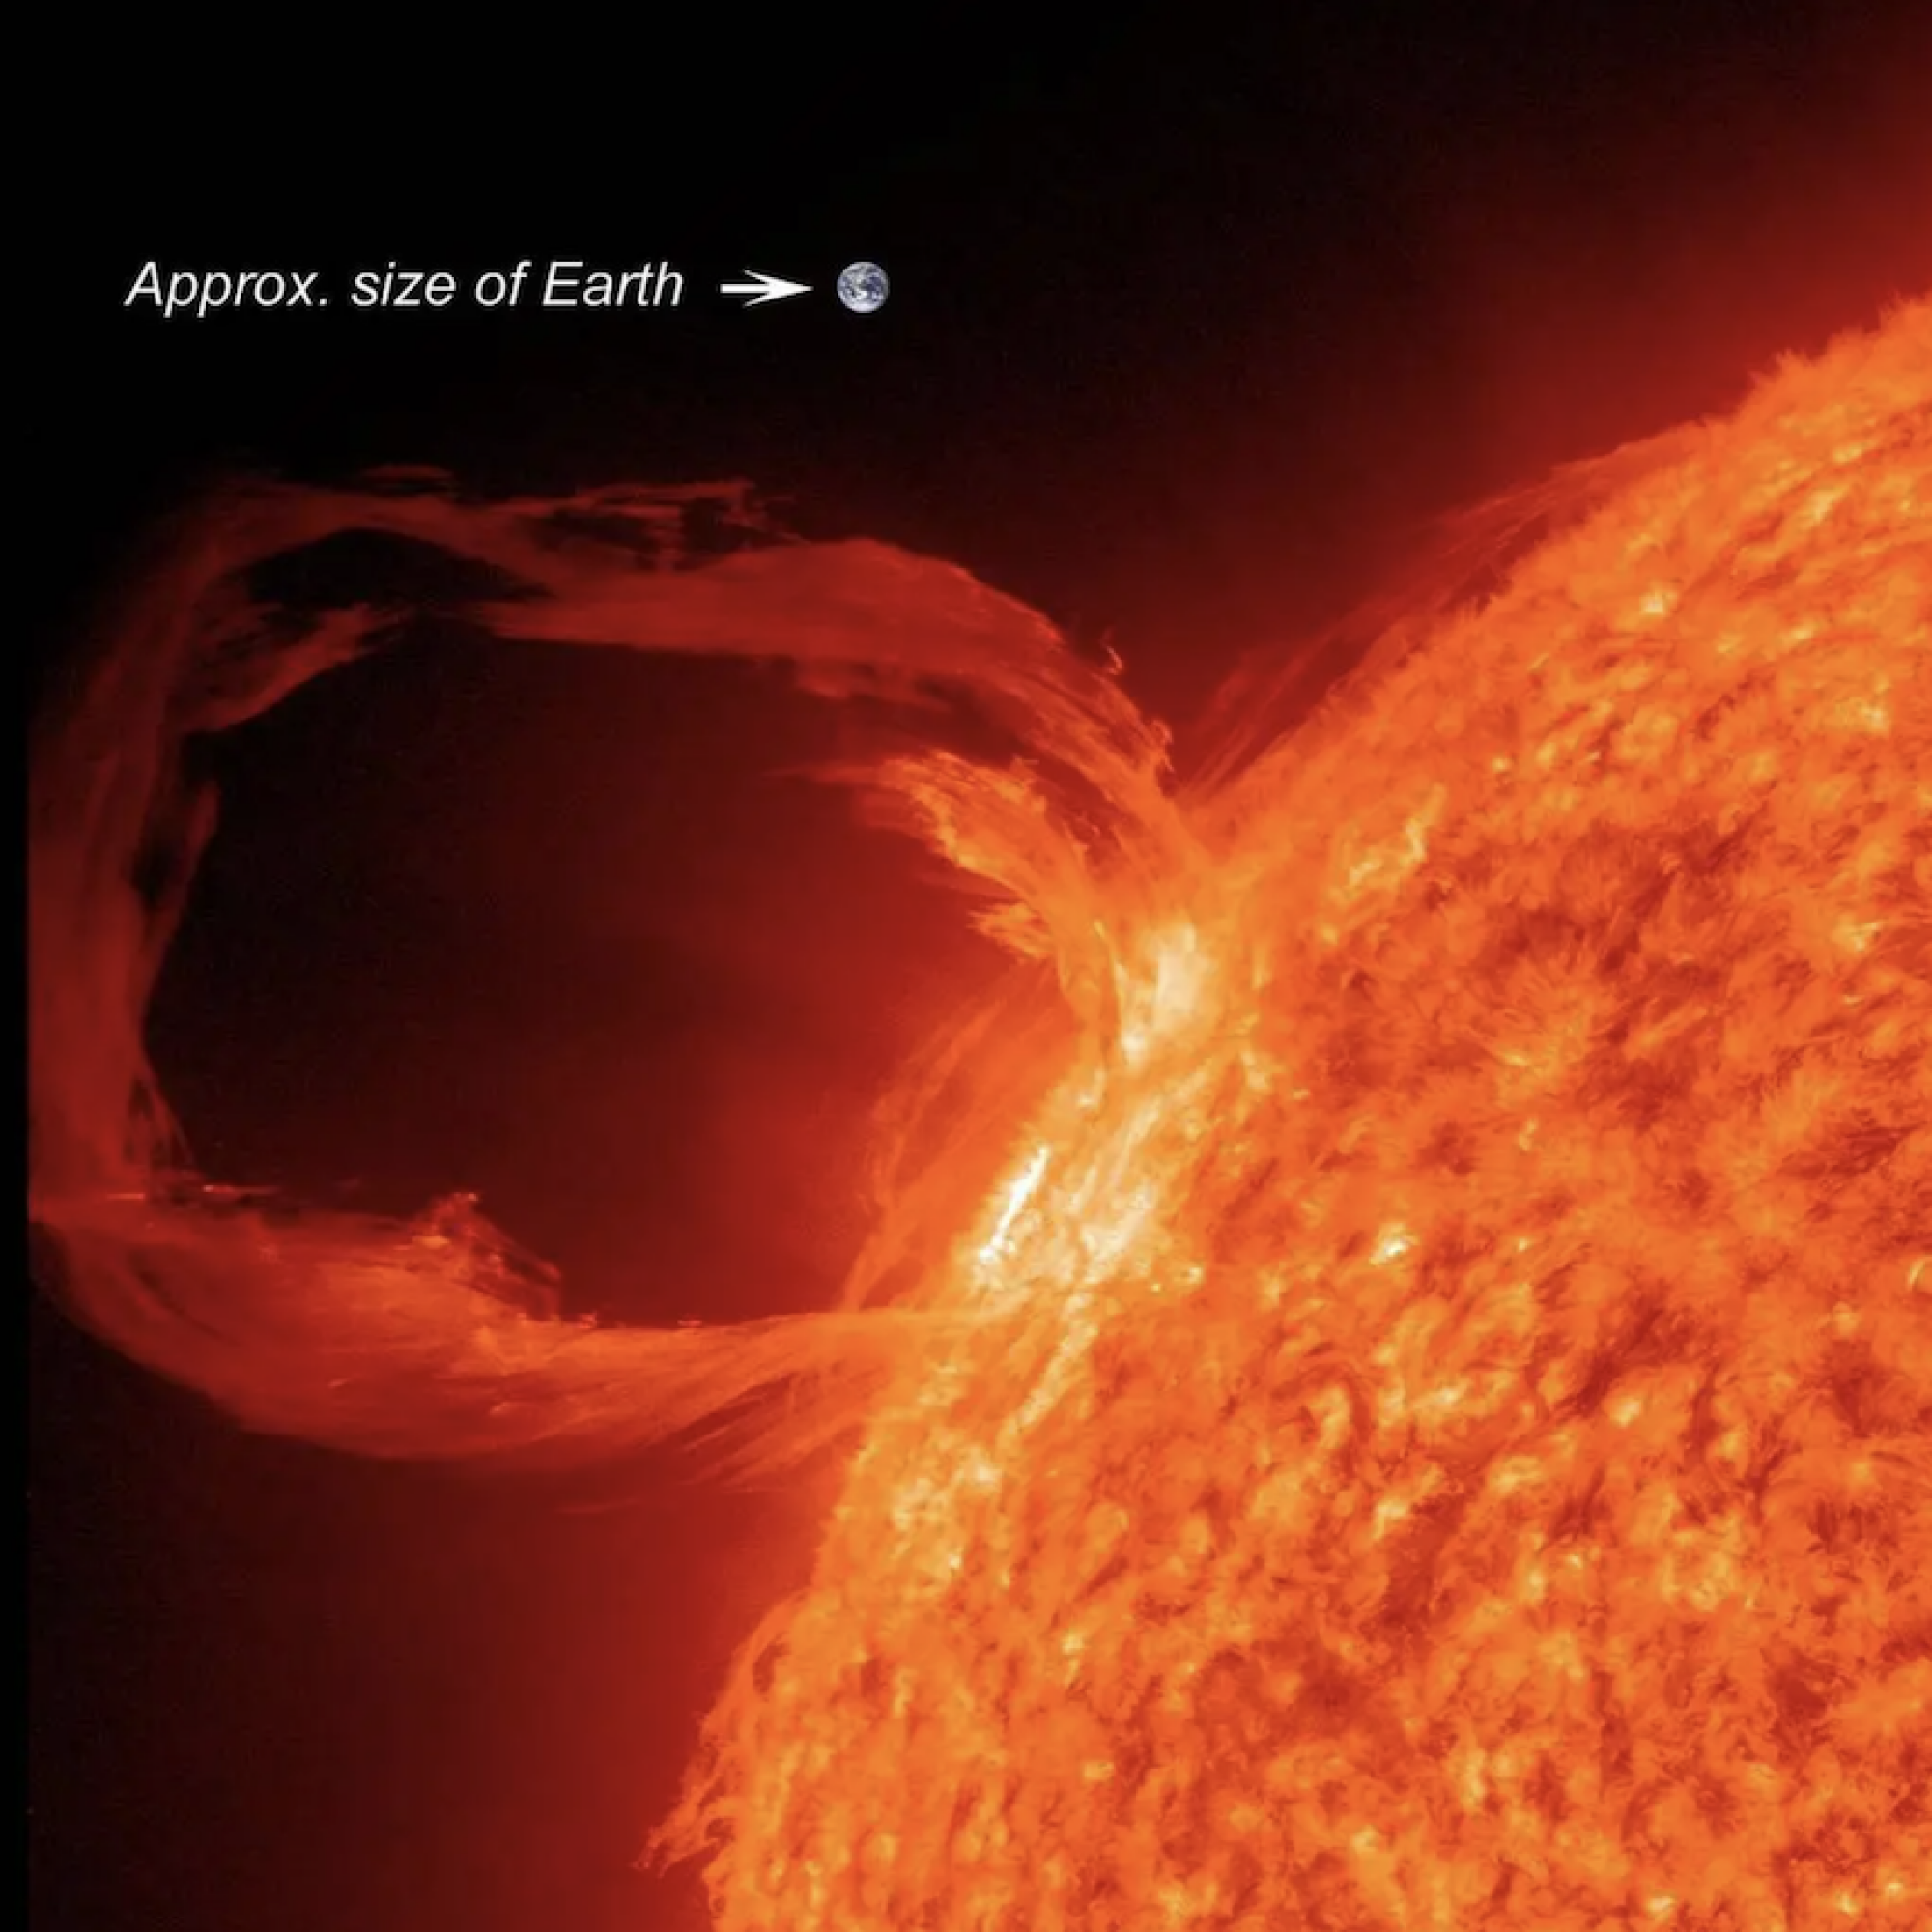 Earth compared to a large solar prominence erupting from the sun's surface.